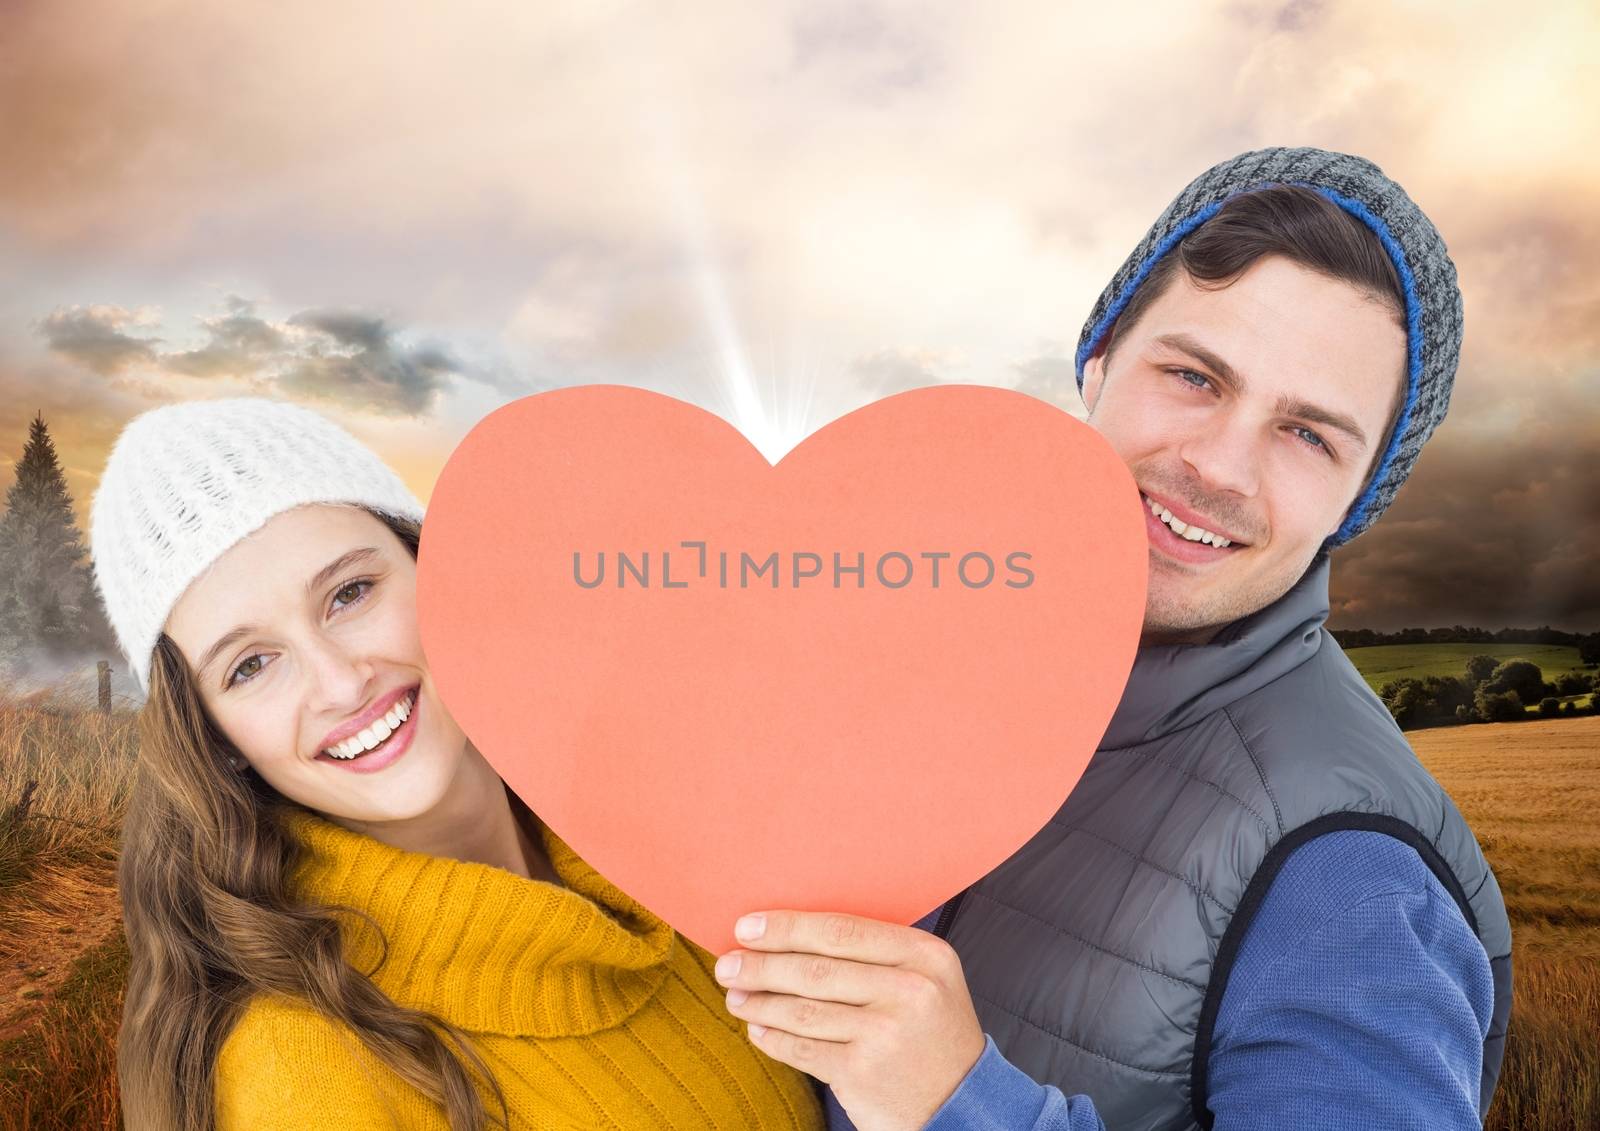 Portrait of romantic couple holding heart against digitally composite field background